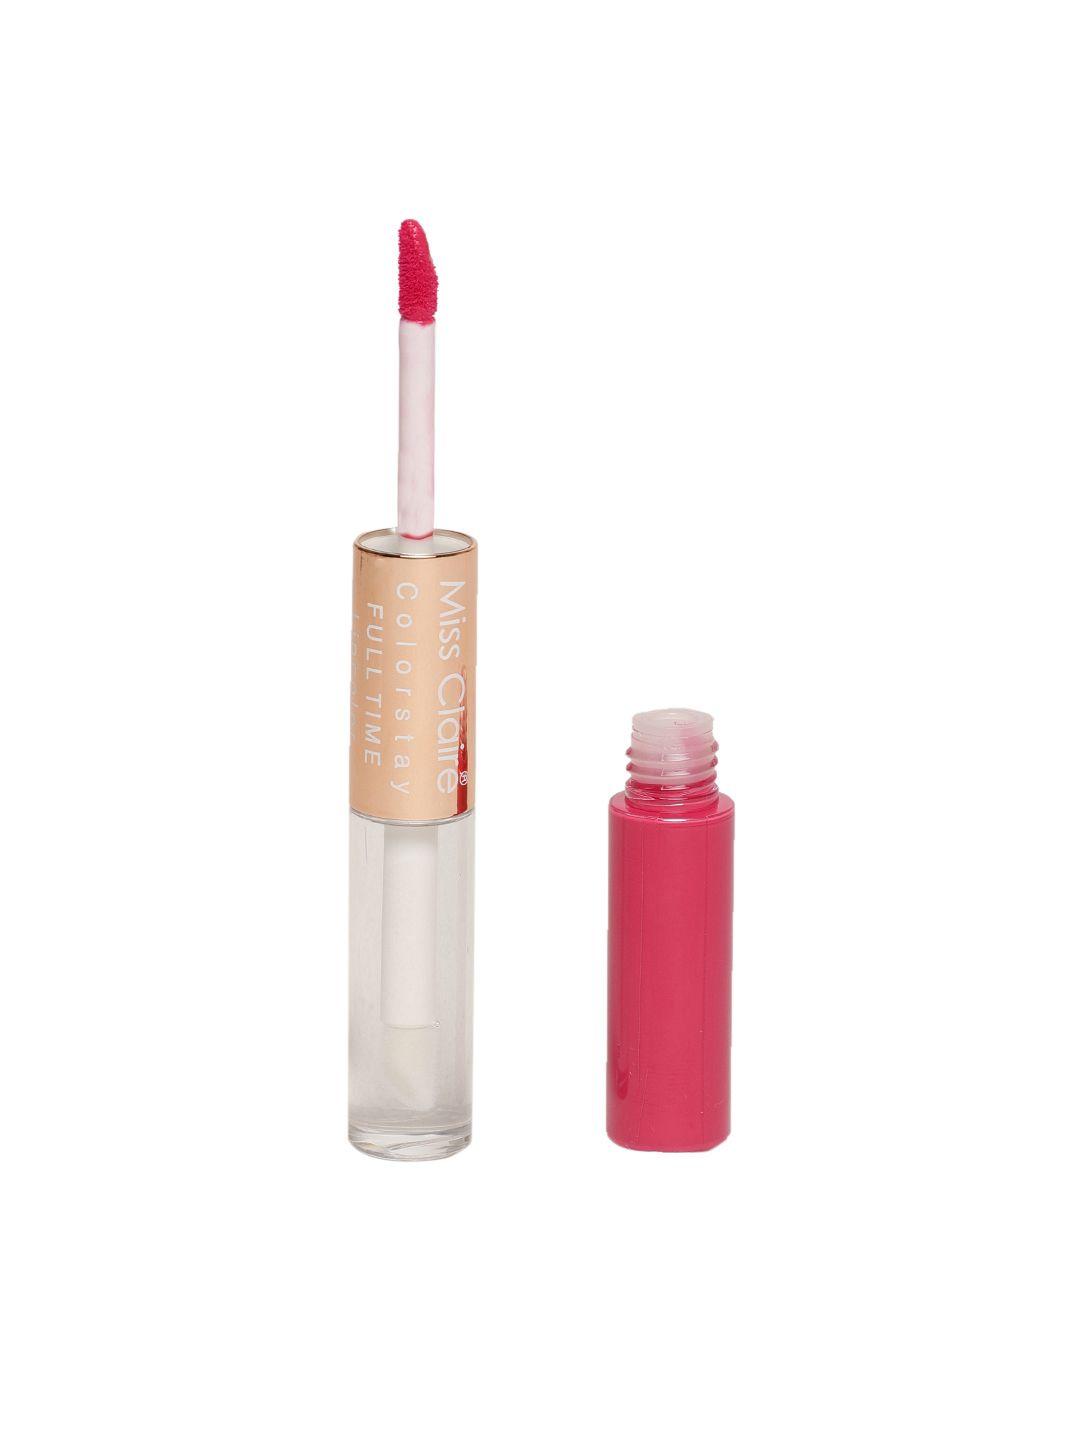 miss-claire-colorstay-full-time-3-lipcolor-10-ml